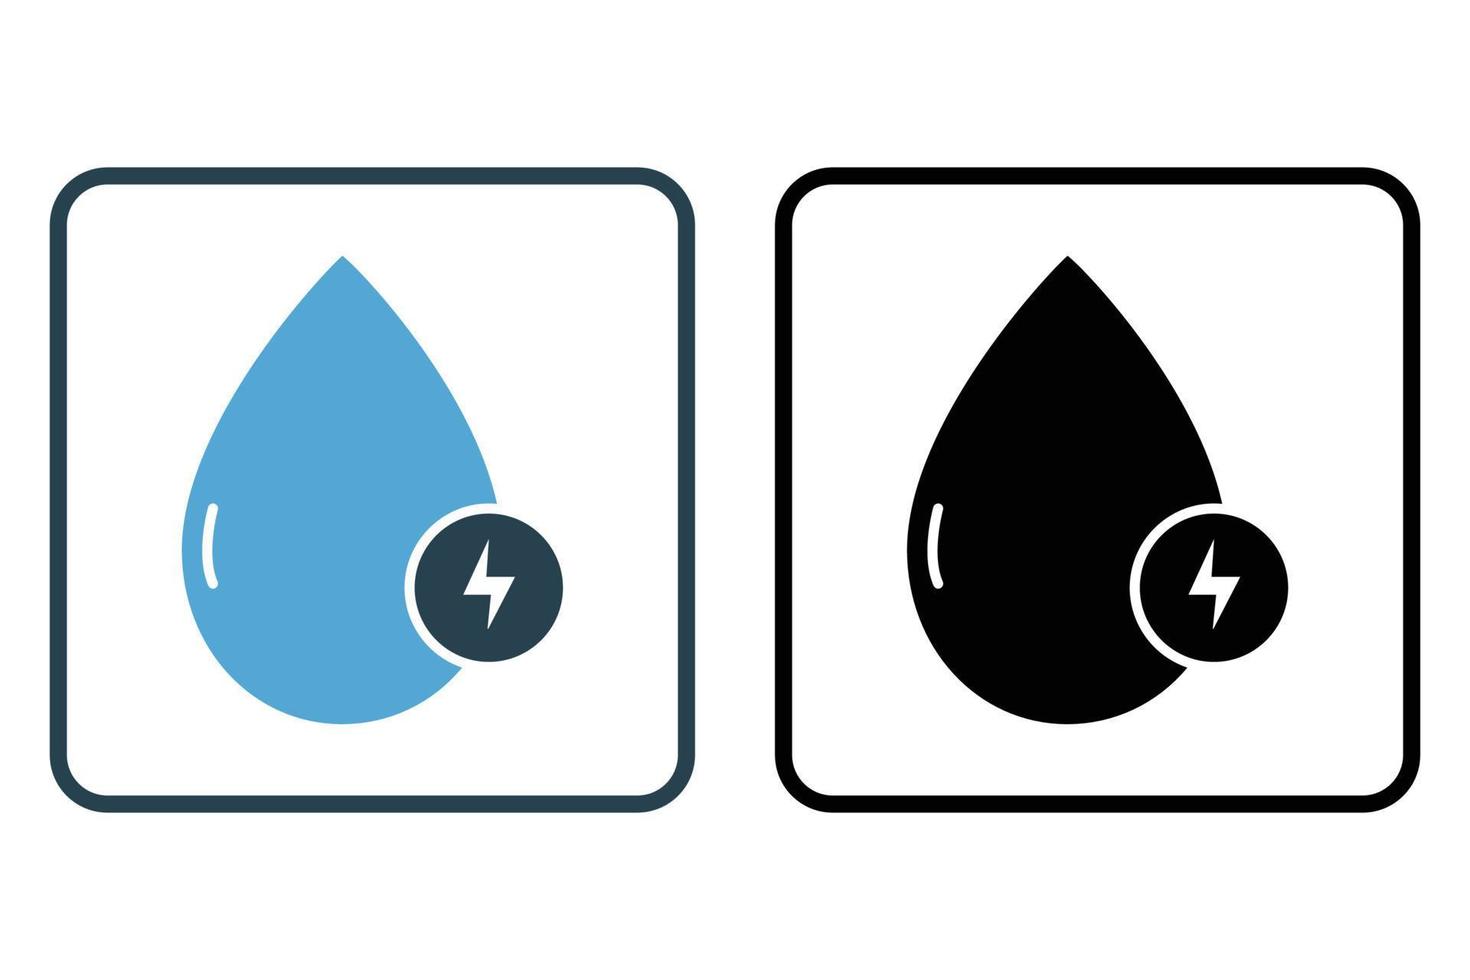 Hydro power icon illustration. water drop icon with electricity. icon related to ecology, renewable energy. Solid icon style. Simple vector design editable